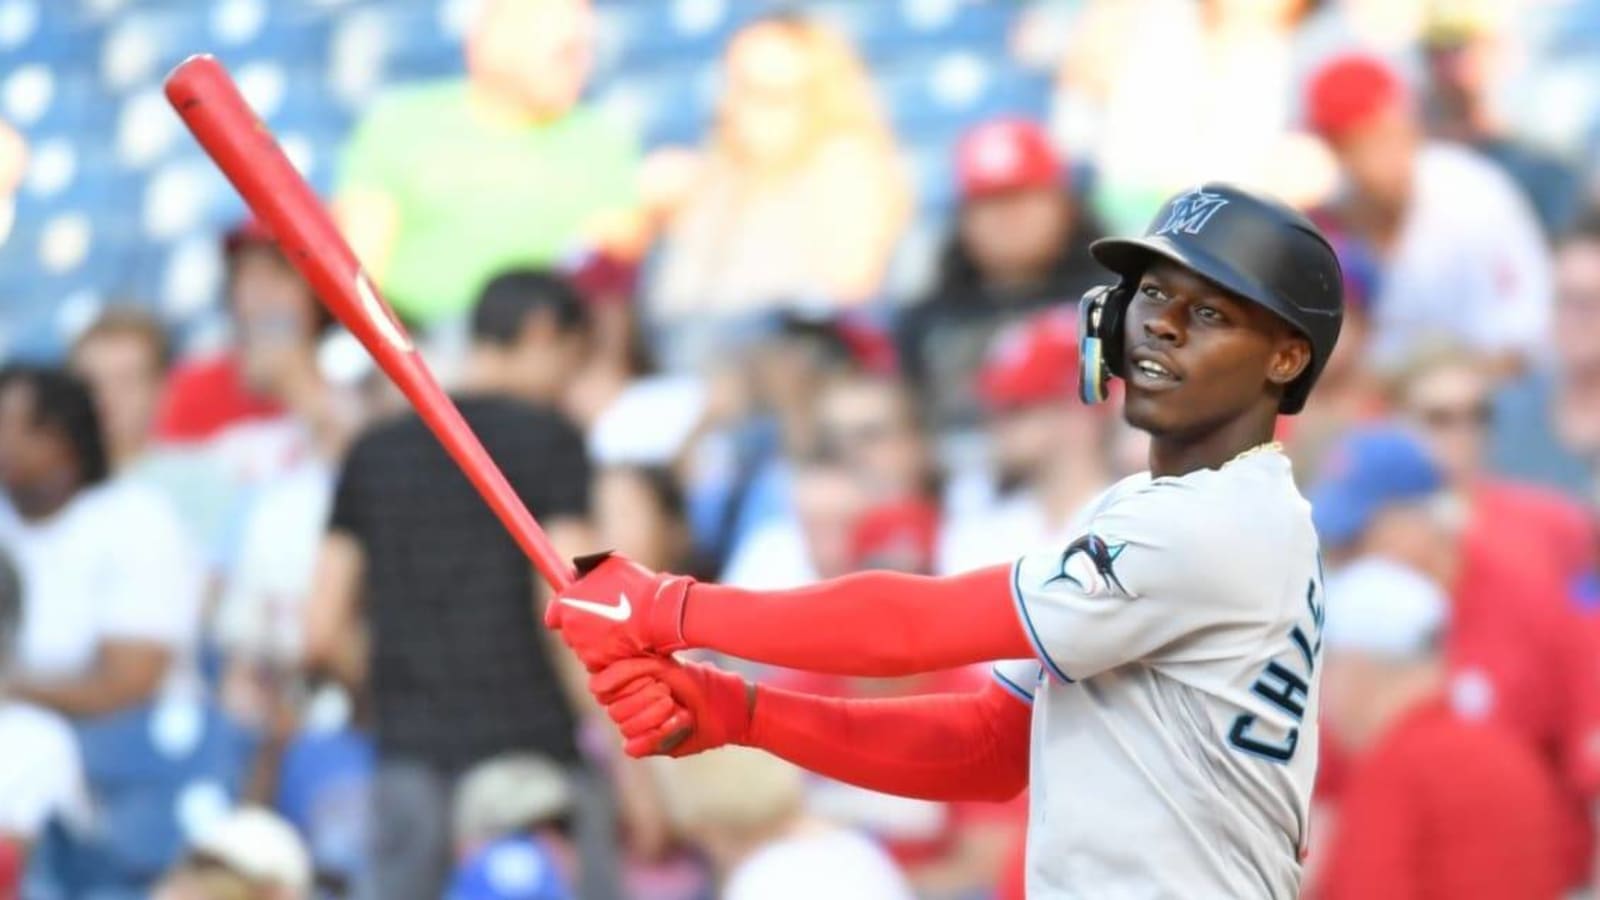 It's Nearly the Fourth of July and Miami's Luis Arráez Is Hitting